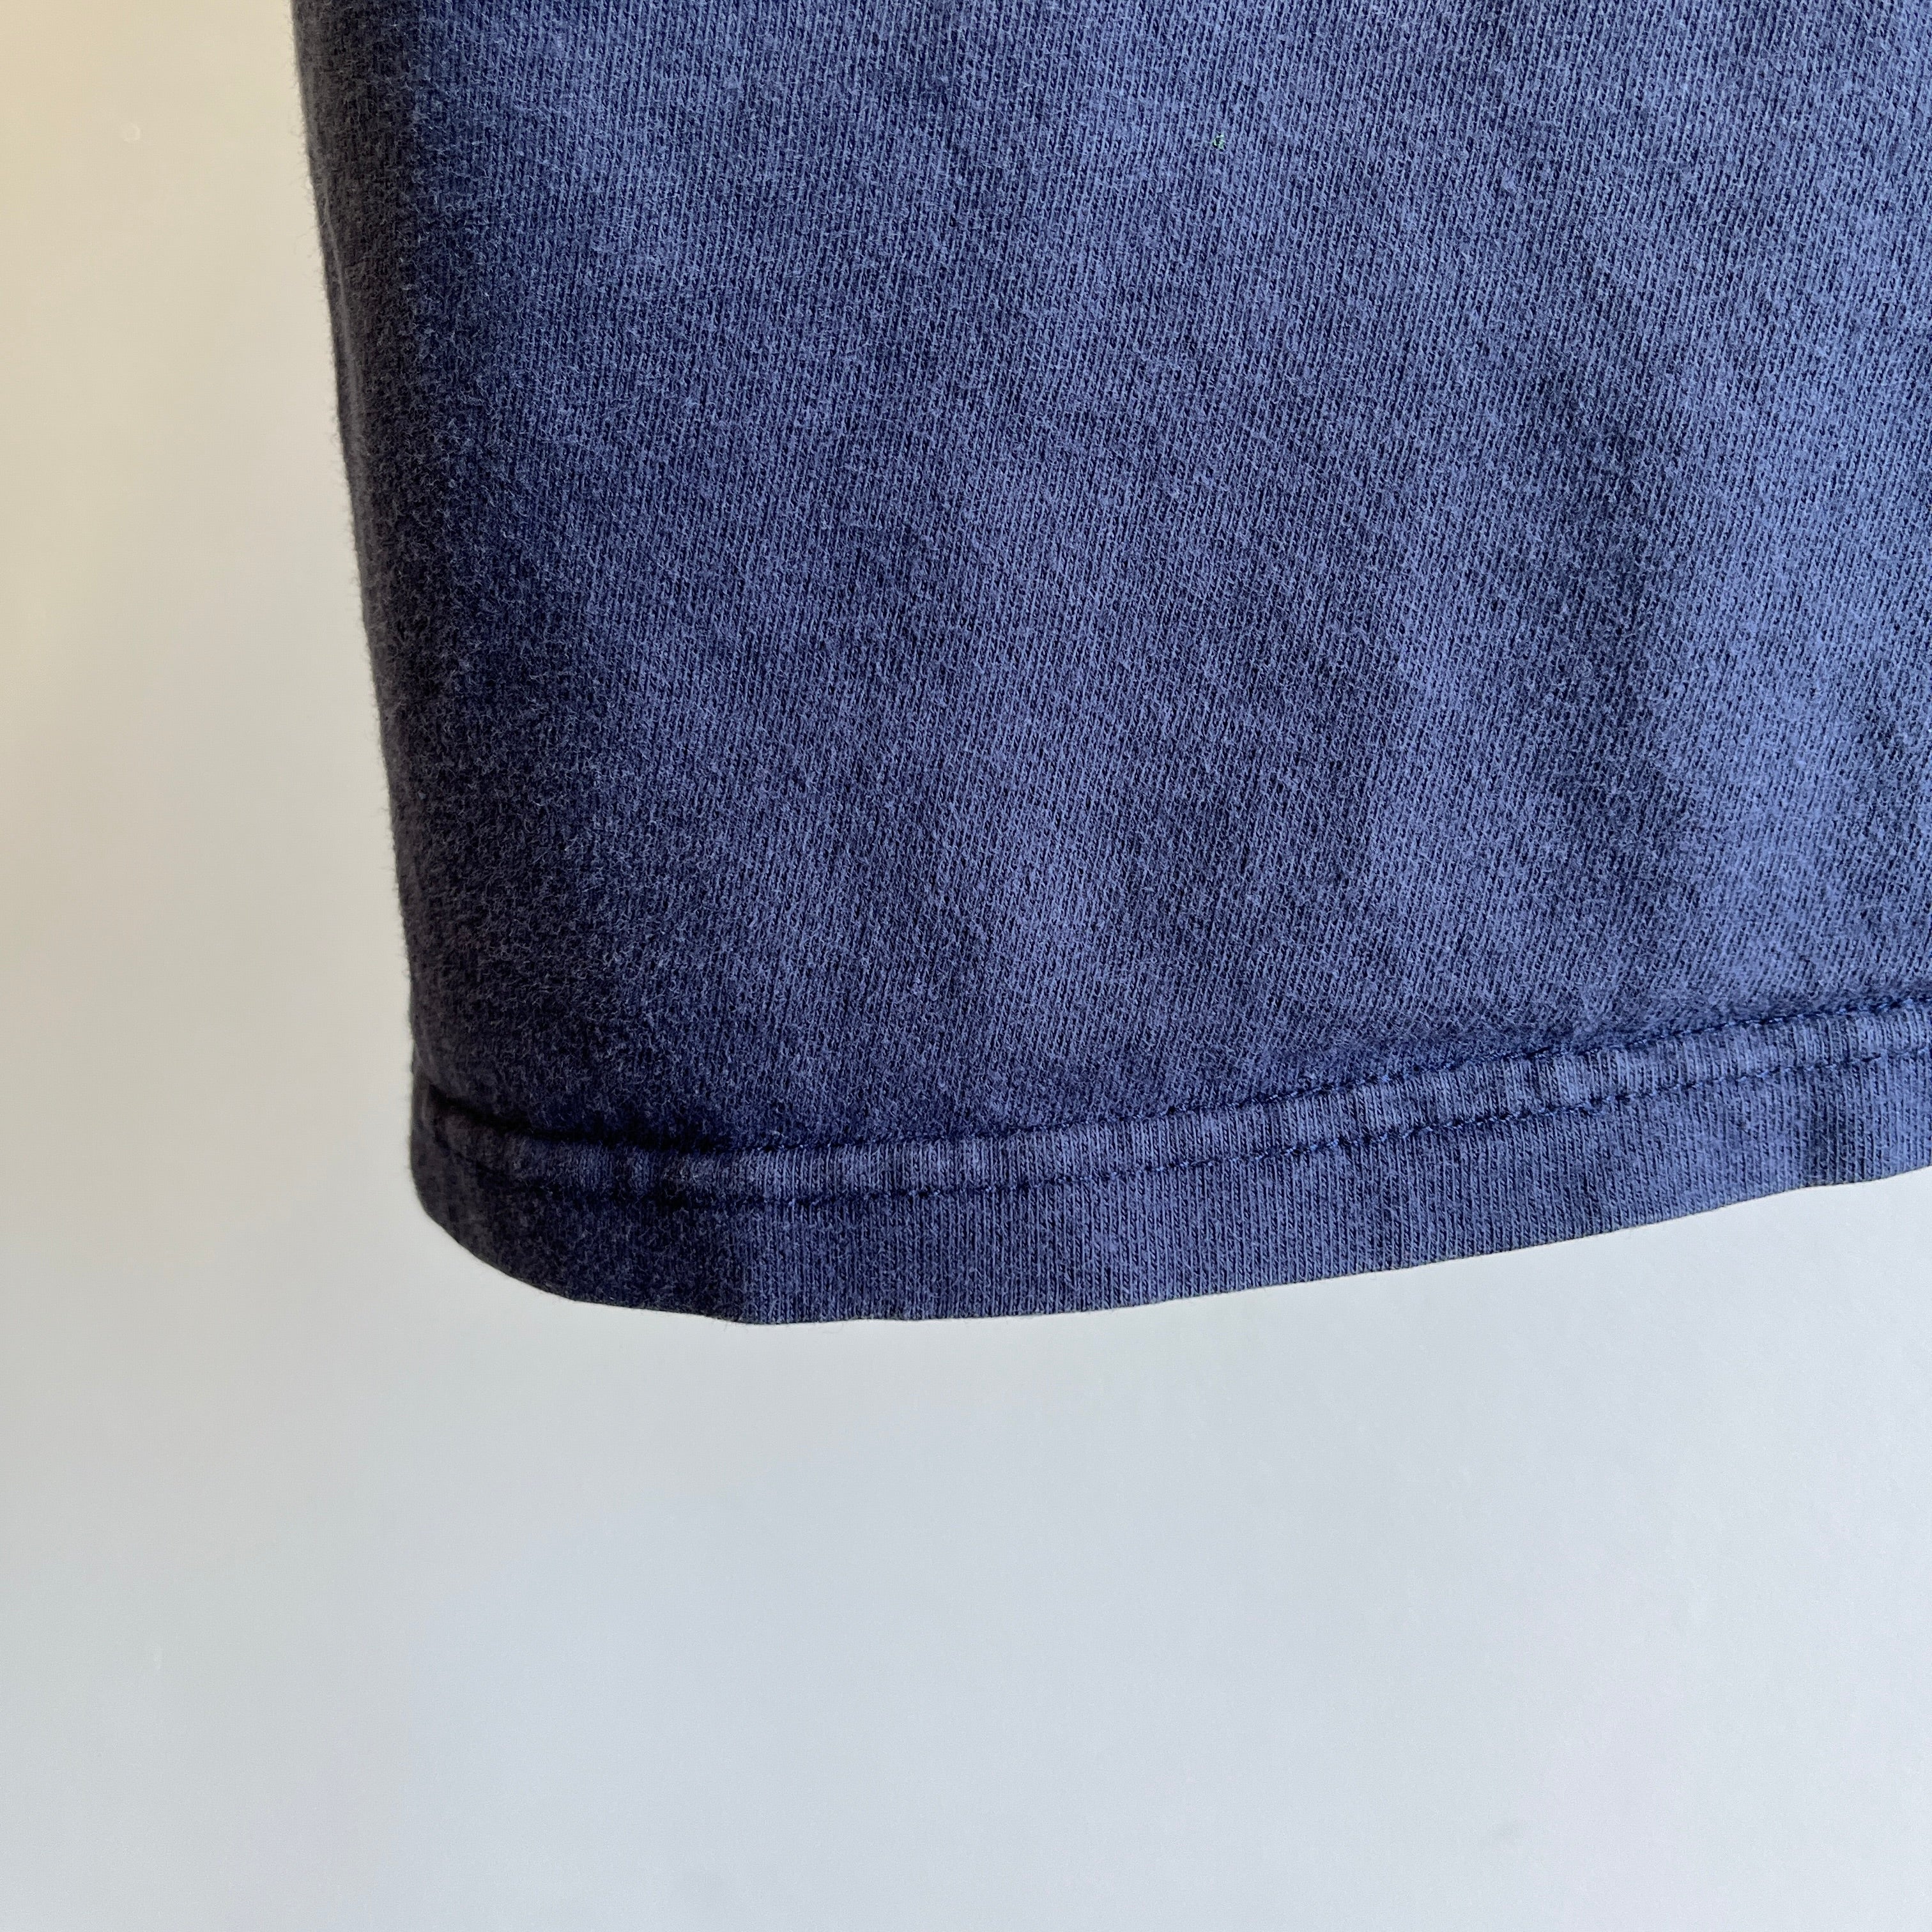 1980s Faded Navy Pocket T-Shirt with a Darker Collar - It's All About the Details!